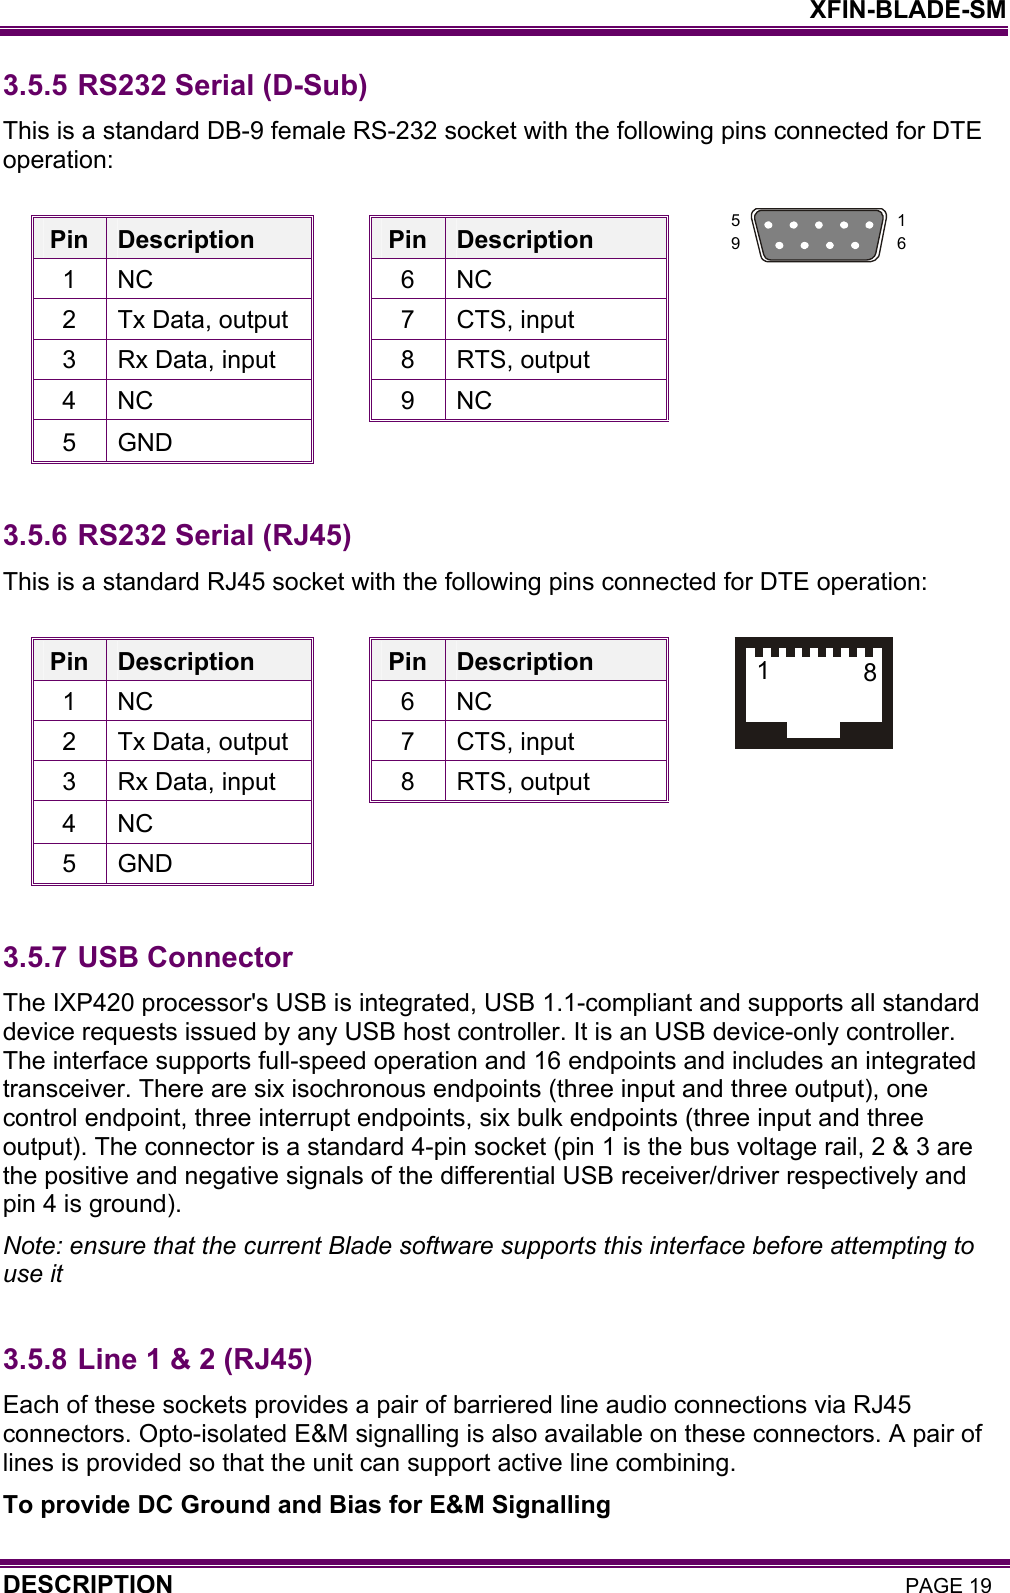    XFIN-BLADE-SM DESCRIPTION PAGE 19 3.5.5 RS232 Serial (D-Sub) This is a standard DB-9 female RS-232 socket with the following pins connected for DTE operation:  Pin  Description  Pin  Description 1 NC  6 NC 2  Tx Data, output  7  CTS, input 3  Rx Data, input  8  RTS, output 4 NC  9 NC 5 GND    3.5.6 RS232 Serial (RJ45) This is a standard RJ45 socket with the following pins connected for DTE operation:  Pin  Description  Pin  Description 1 NC  6 NC 2  Tx Data, output  7  CTS, input 3  Rx Data, input  8  RTS, output 4 NC     5 GND    3.5.7 USB Connector The IXP420 processor&apos;s USB is integrated, USB 1.1-compliant and supports all standard device requests issued by any USB host controller. It is an USB device-only controller. The interface supports full-speed operation and 16 endpoints and includes an integrated transceiver. There are six isochronous endpoints (three input and three output), one control endpoint, three interrupt endpoints, six bulk endpoints (three input and three output). The connector is a standard 4-pin socket (pin 1 is the bus voltage rail, 2 &amp; 3 are the positive and negative signals of the differential USB receiver/driver respectively and pin 4 is ground). Note: ensure that the current Blade software supports this interface before attempting to use it  3.5.8 Line 1 &amp; 2 (RJ45) Each of these sockets provides a pair of barriered line audio connections via RJ45 connectors. Opto-isolated E&amp;M signalling is also available on these connectors. A pair of lines is provided so that the unit can support active line combining. To provide DC Ground and Bias for E&amp;M Signalling 1 6 5 9 1  8 